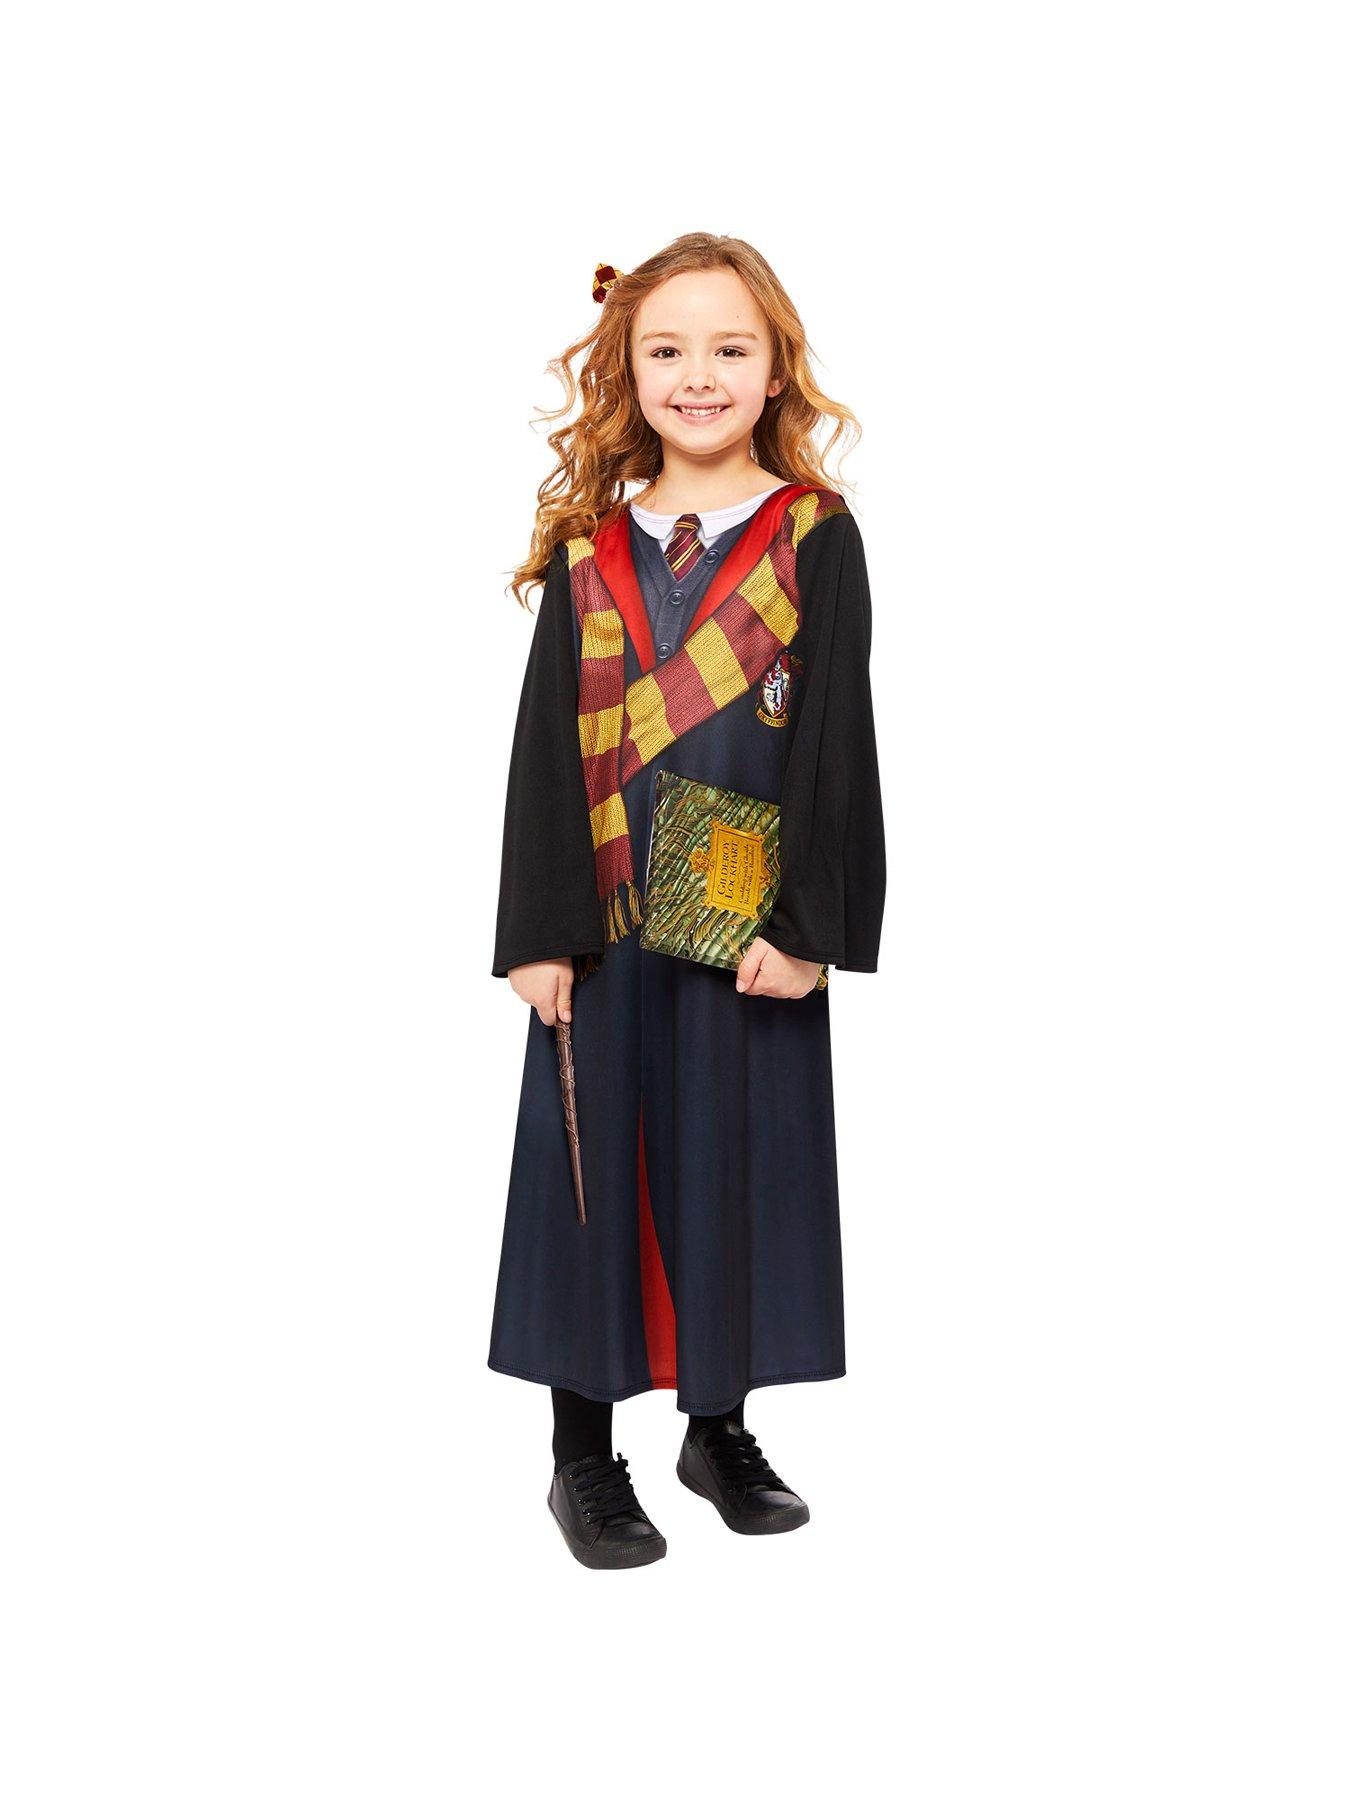 Harry Potter The Magician Famous Movie Series Character Fancy Dress Costume  With Accessories For Kids|Events and Theme Parties